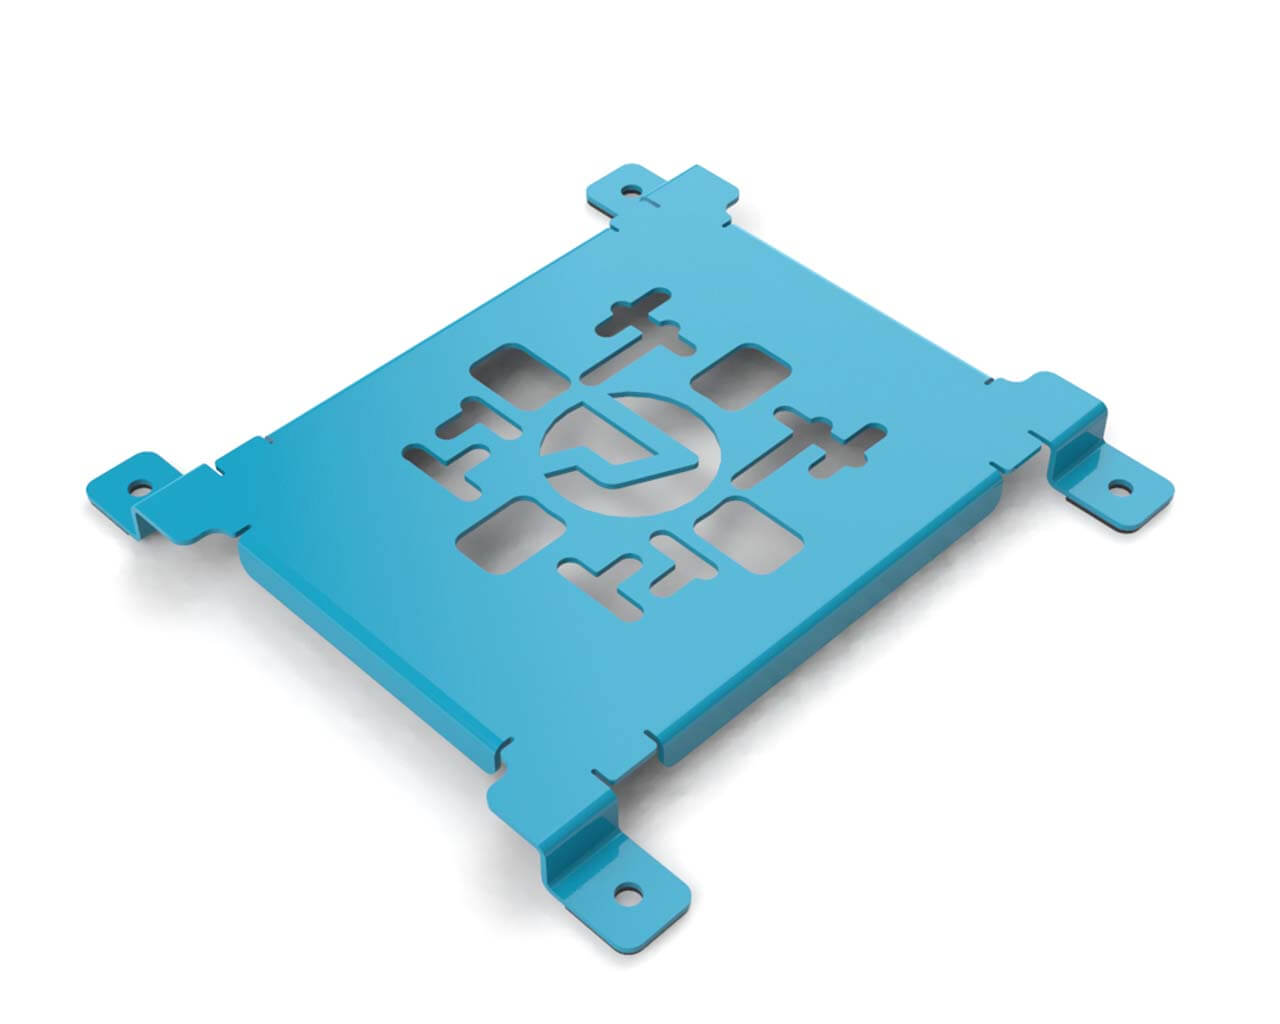 PrimoChill SX Spider Mount Bracket - 140mm Series - PrimoChill - KEEPING IT COOL Sky Blue